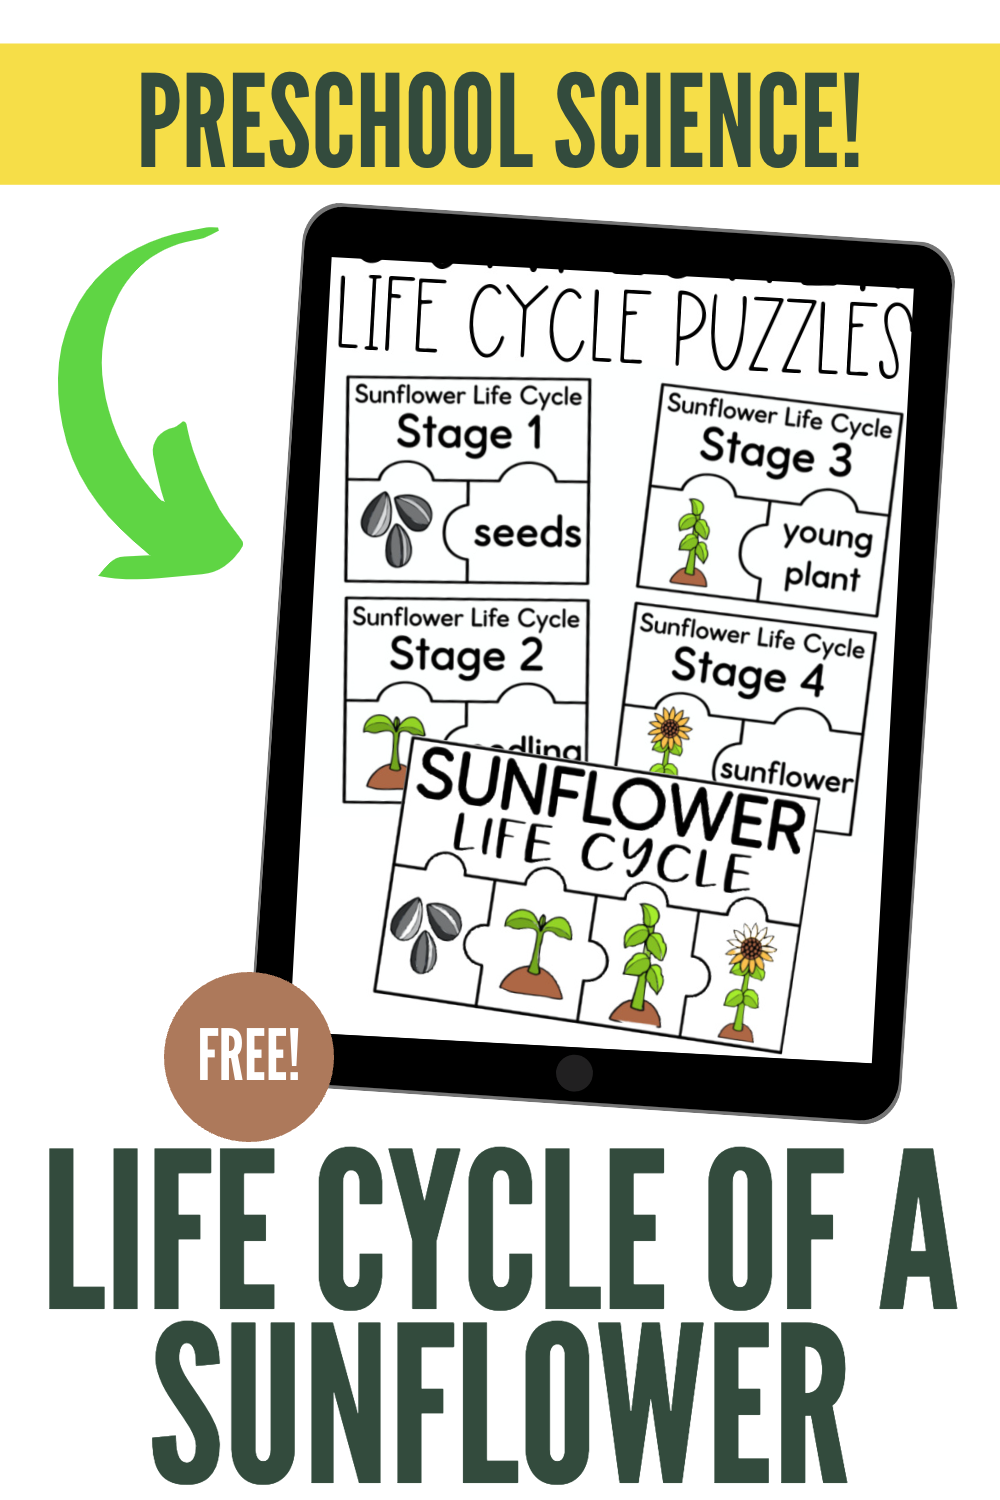 sunflower-life-cycle-preschool-science Sunflower Life Cycle Activity